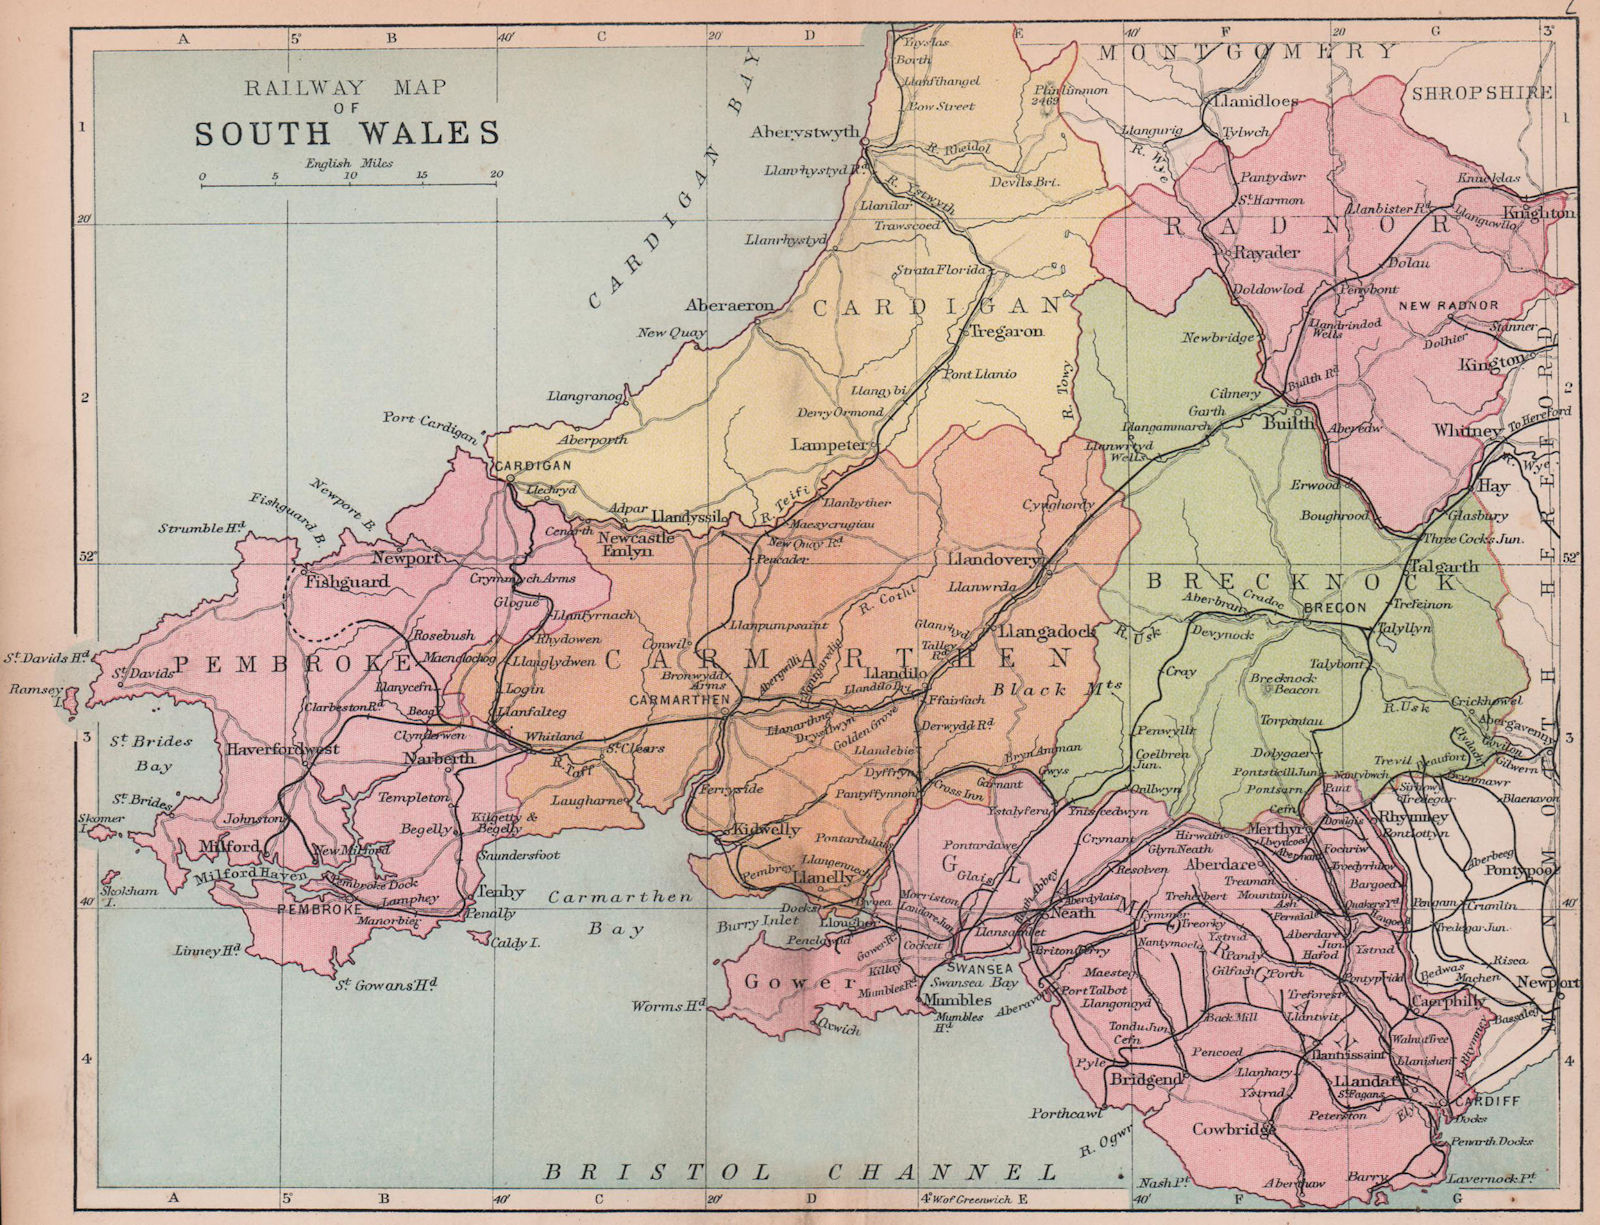 WALES Railway Map of South Wales BARTHOLOMEW 1882 old antique plan chart